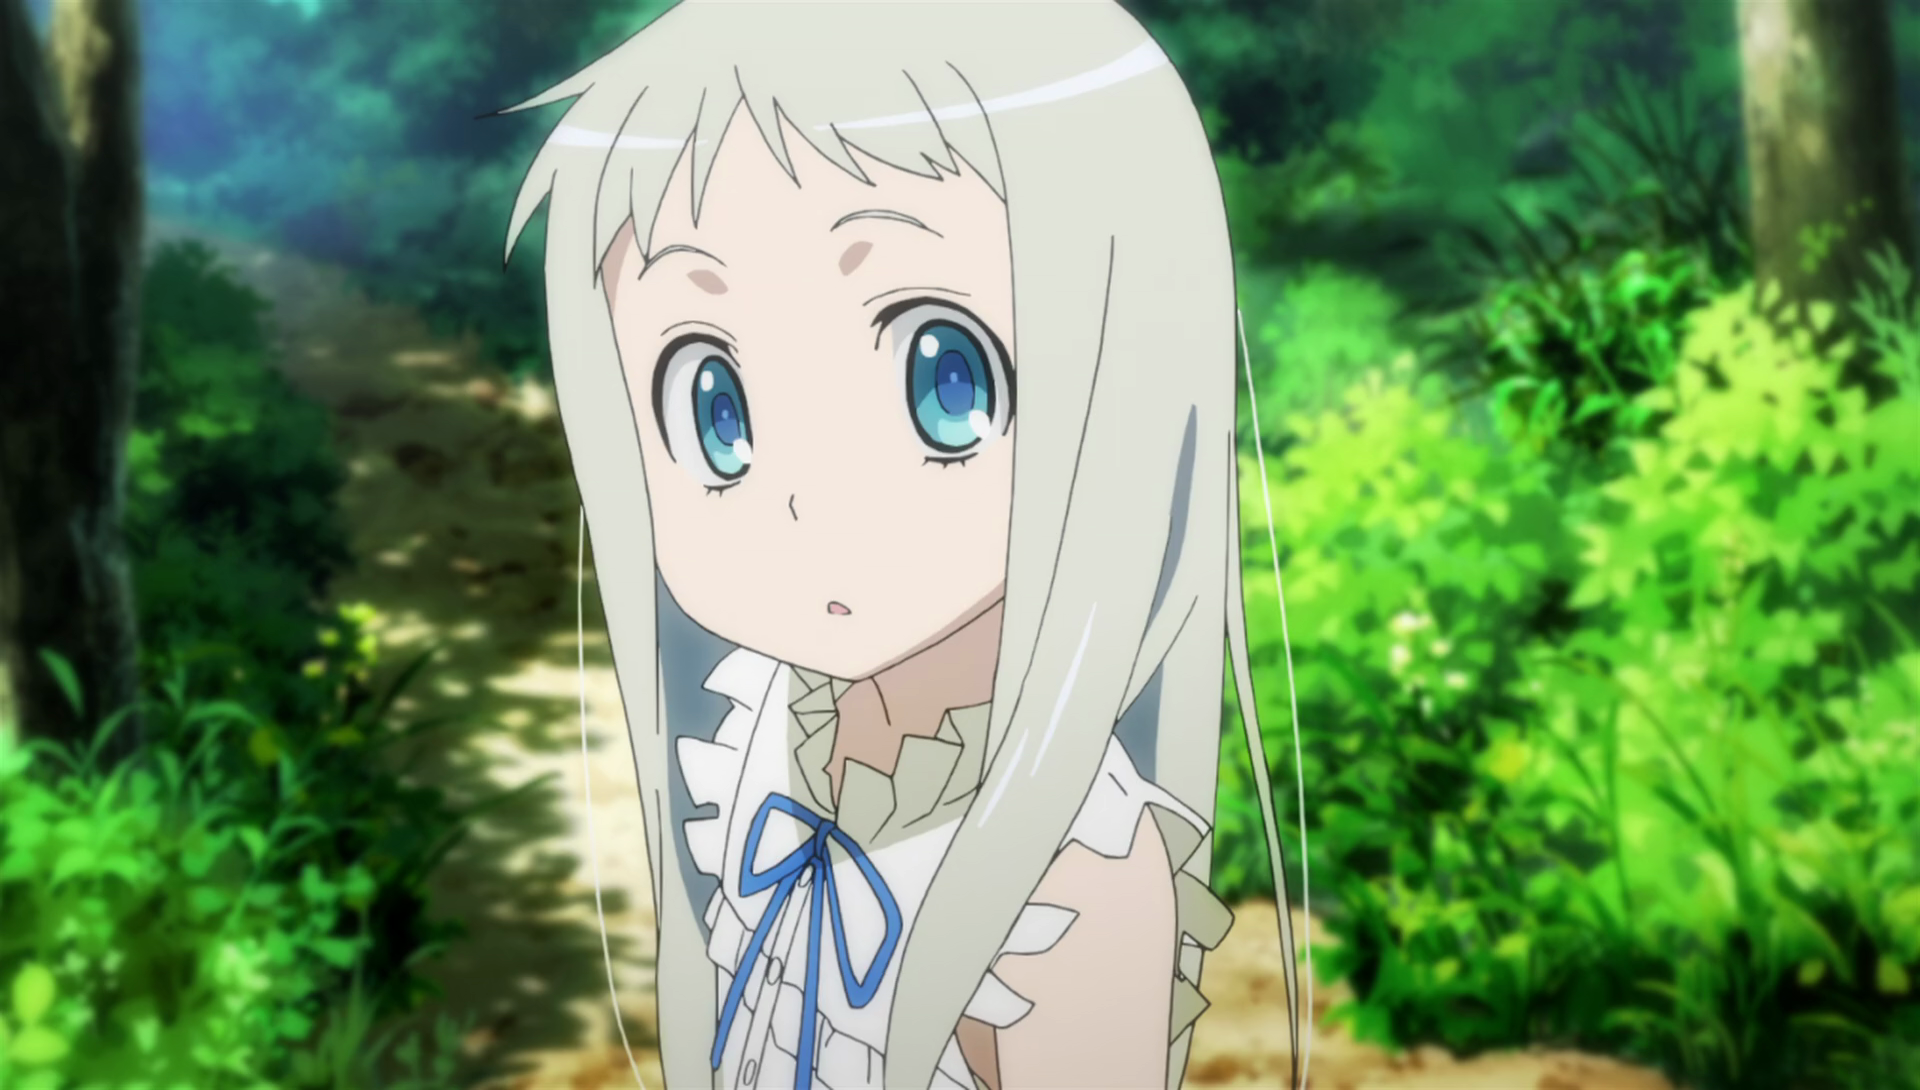 Menma: Anohana: The Flower We Saw That Day